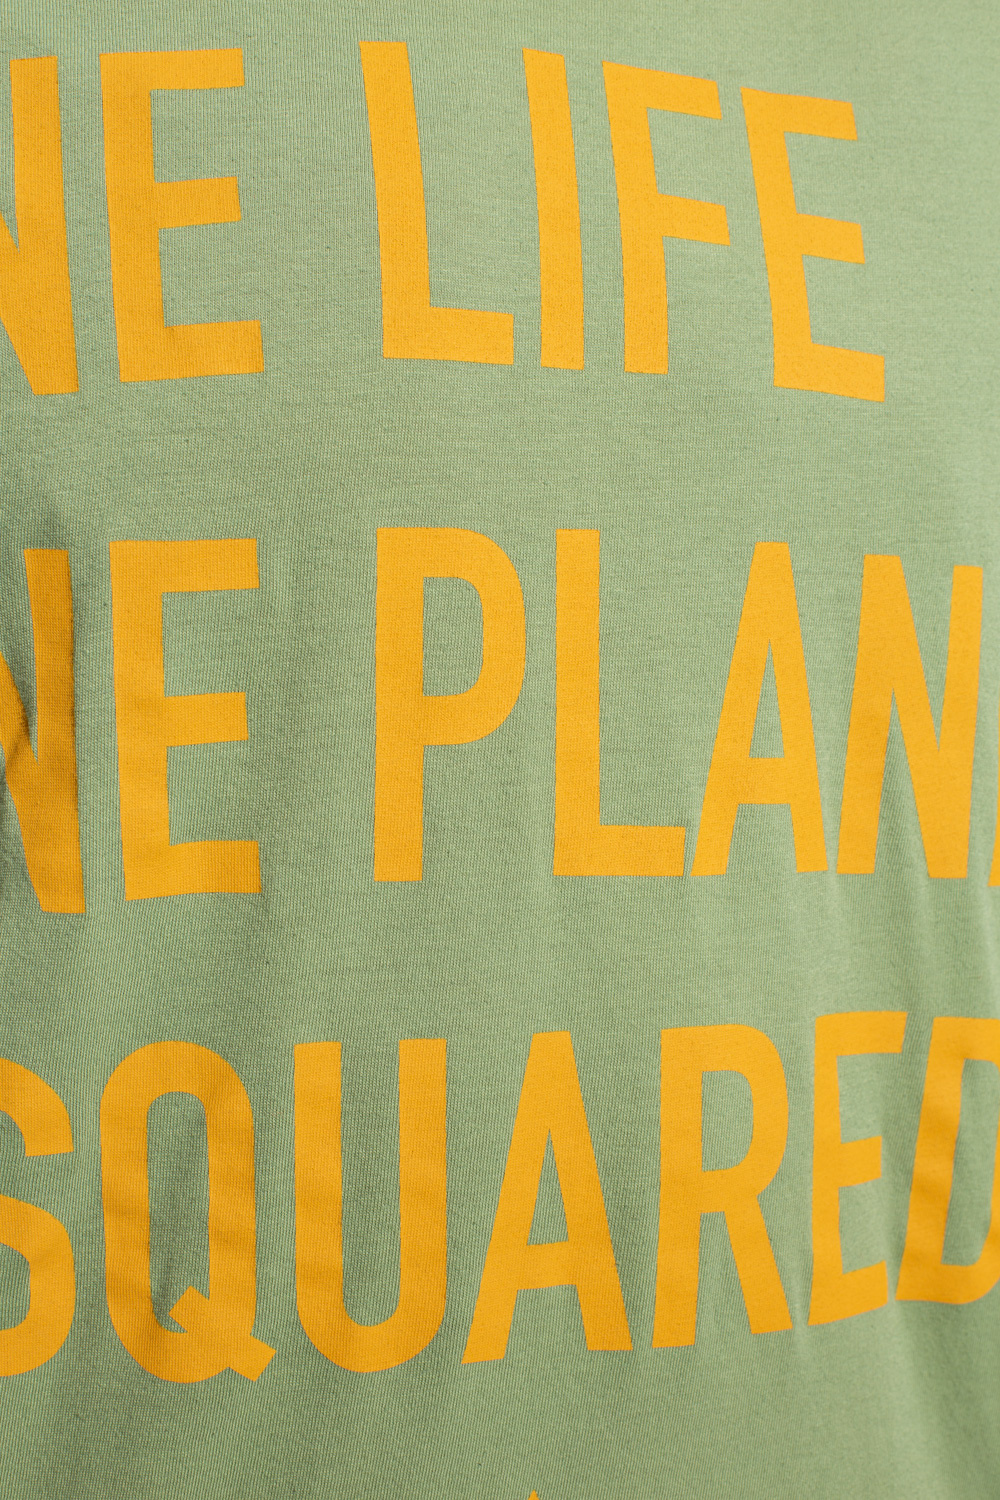 Dsquared2 ‘One Life One Planet’ collection T-shirt